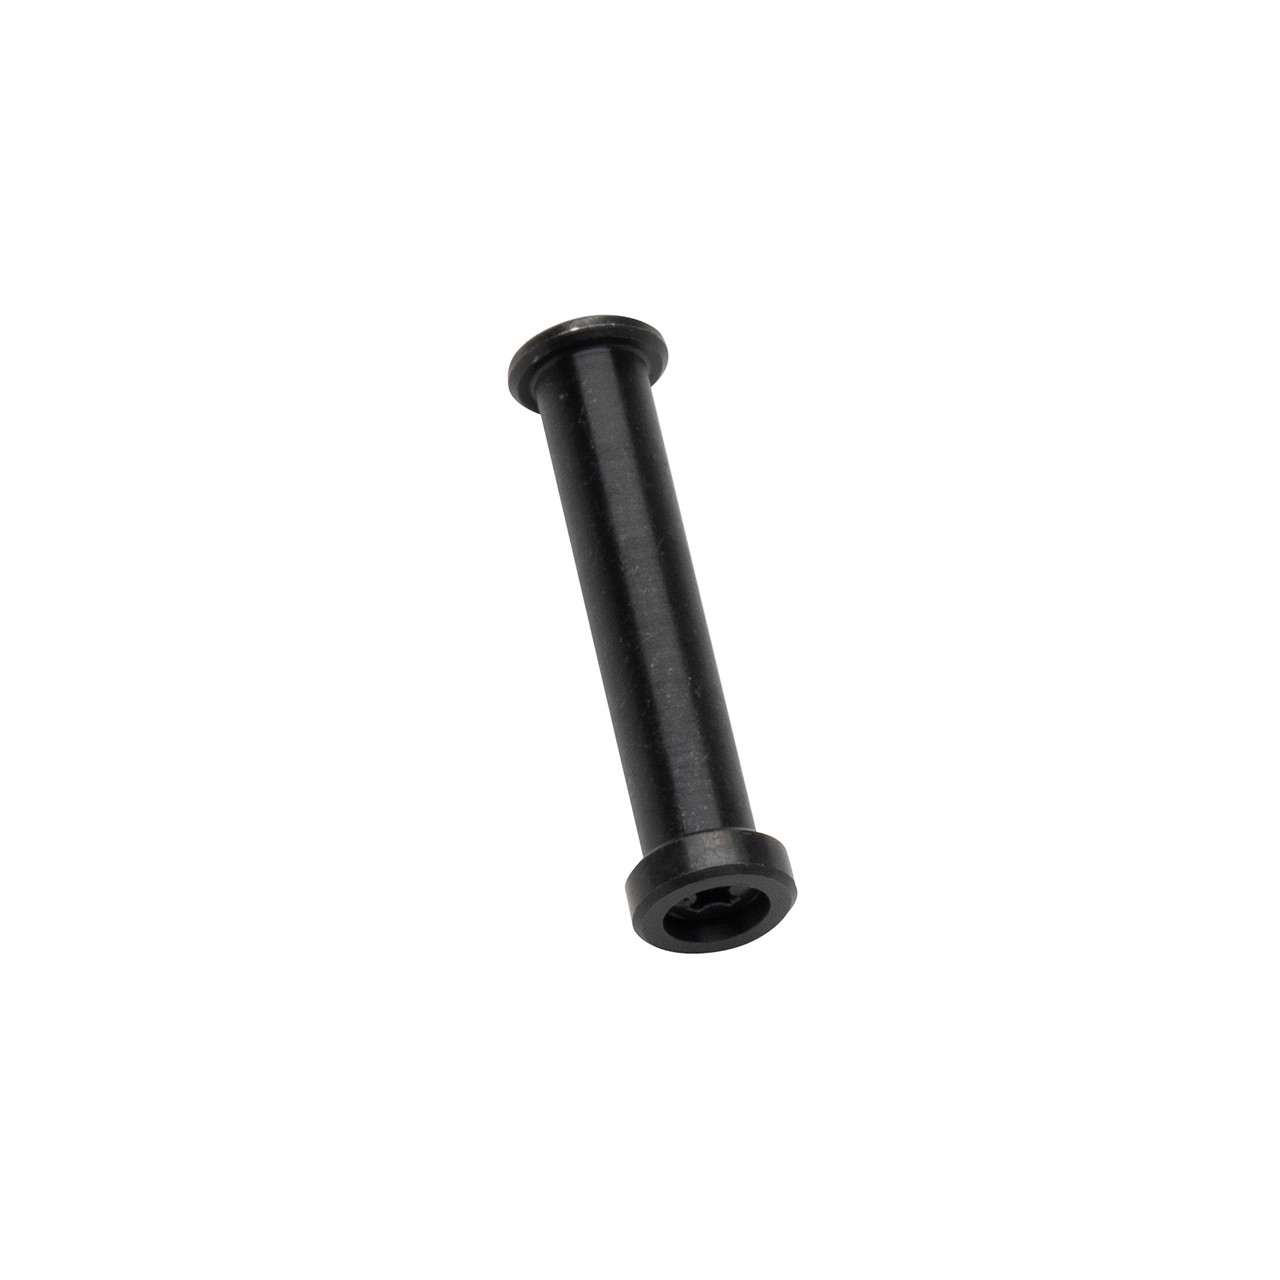 Shop KRISS Vector Security Pin Assembly - $ 6.95 - Krytac.com | For Airsoft Use Only.